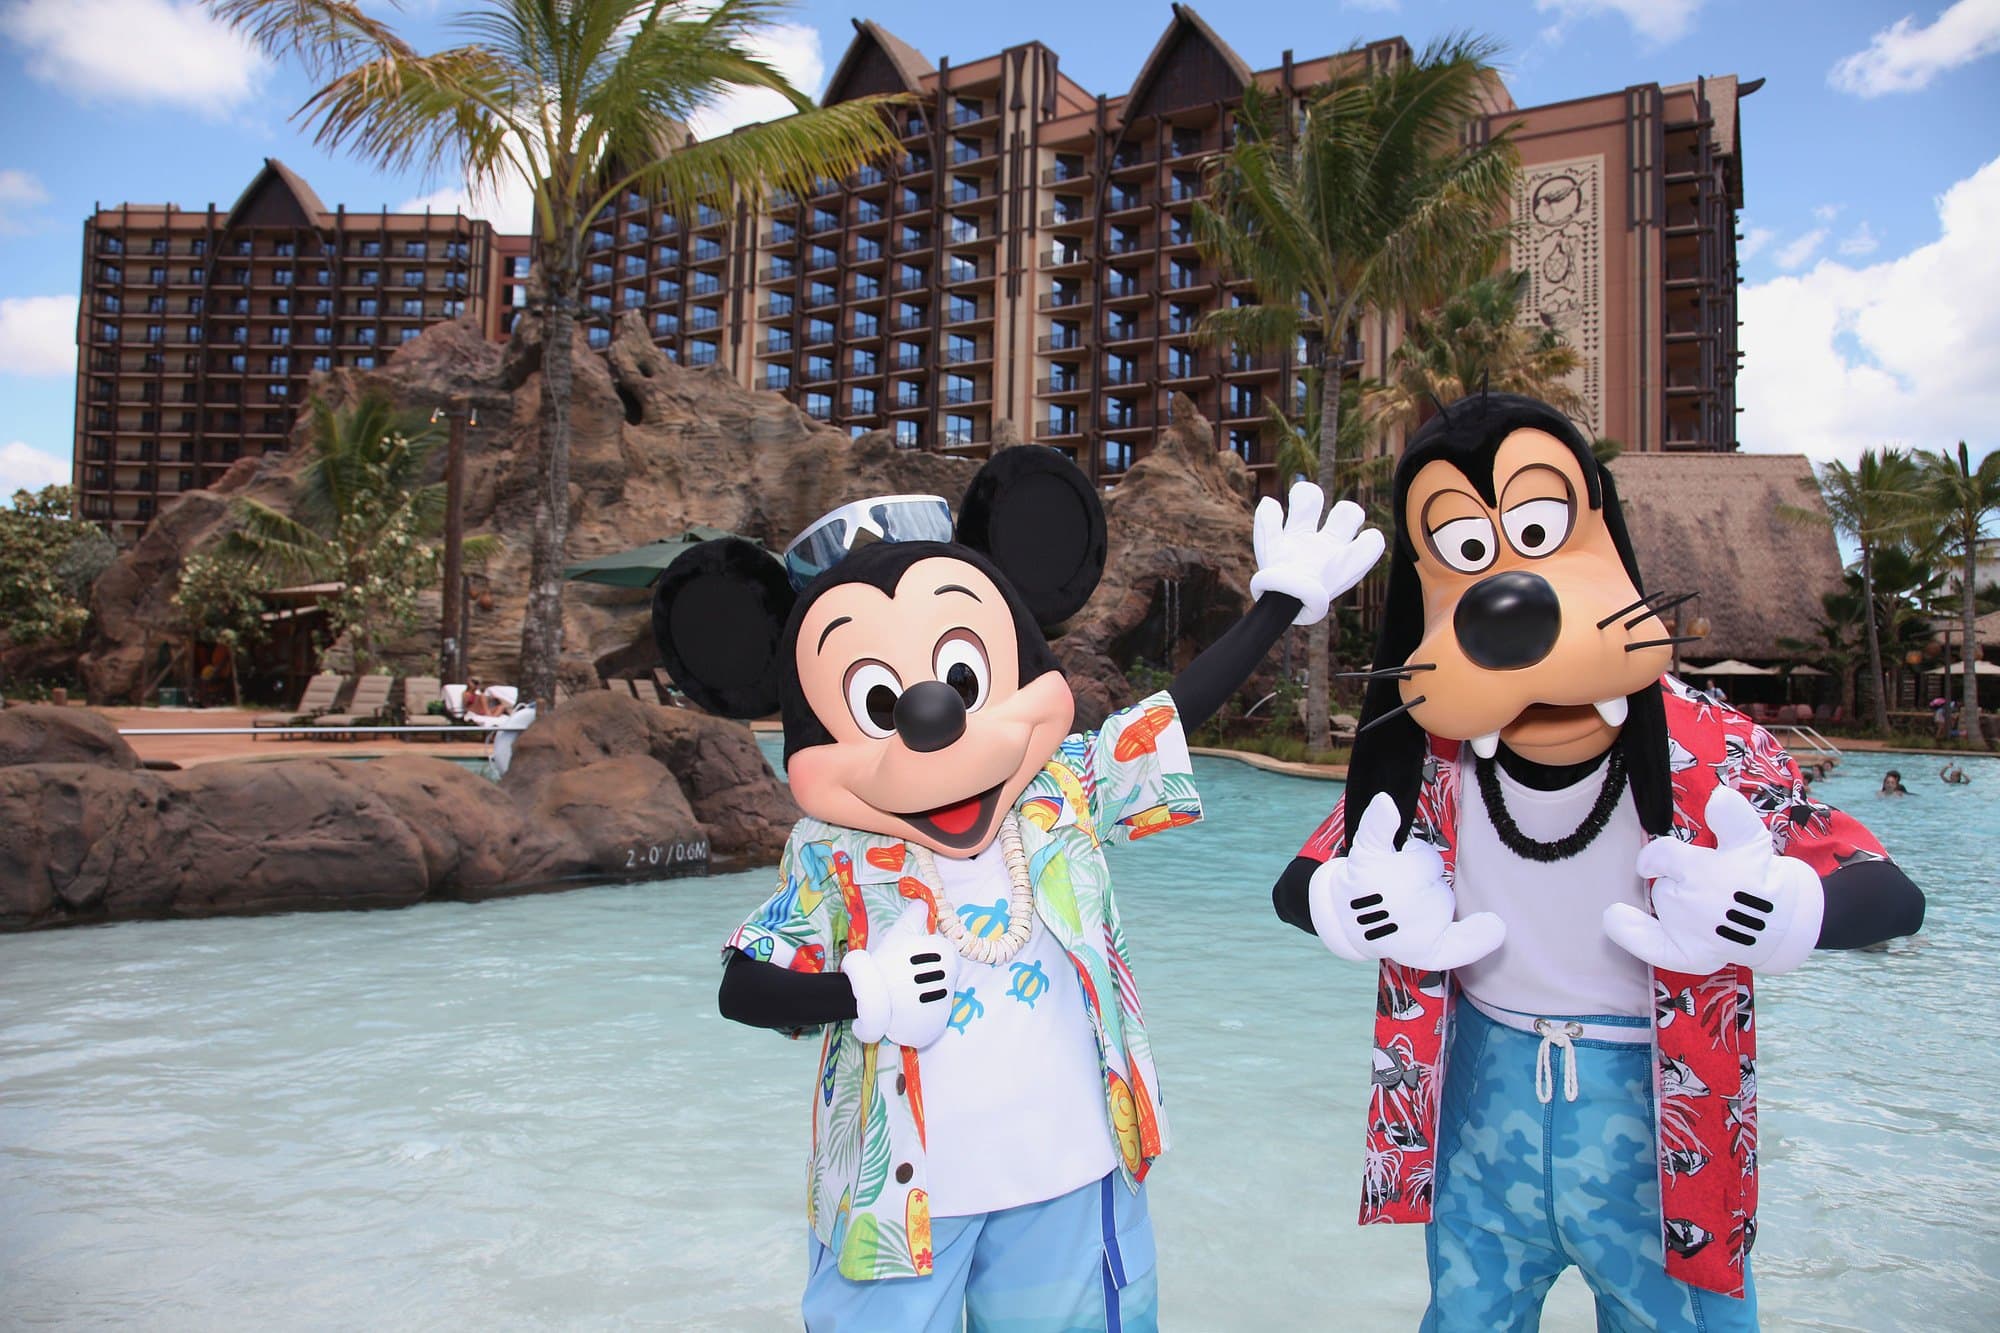 You just might see Disney characters like Mickey Mouse and Goofy poolside at Disney Aulani